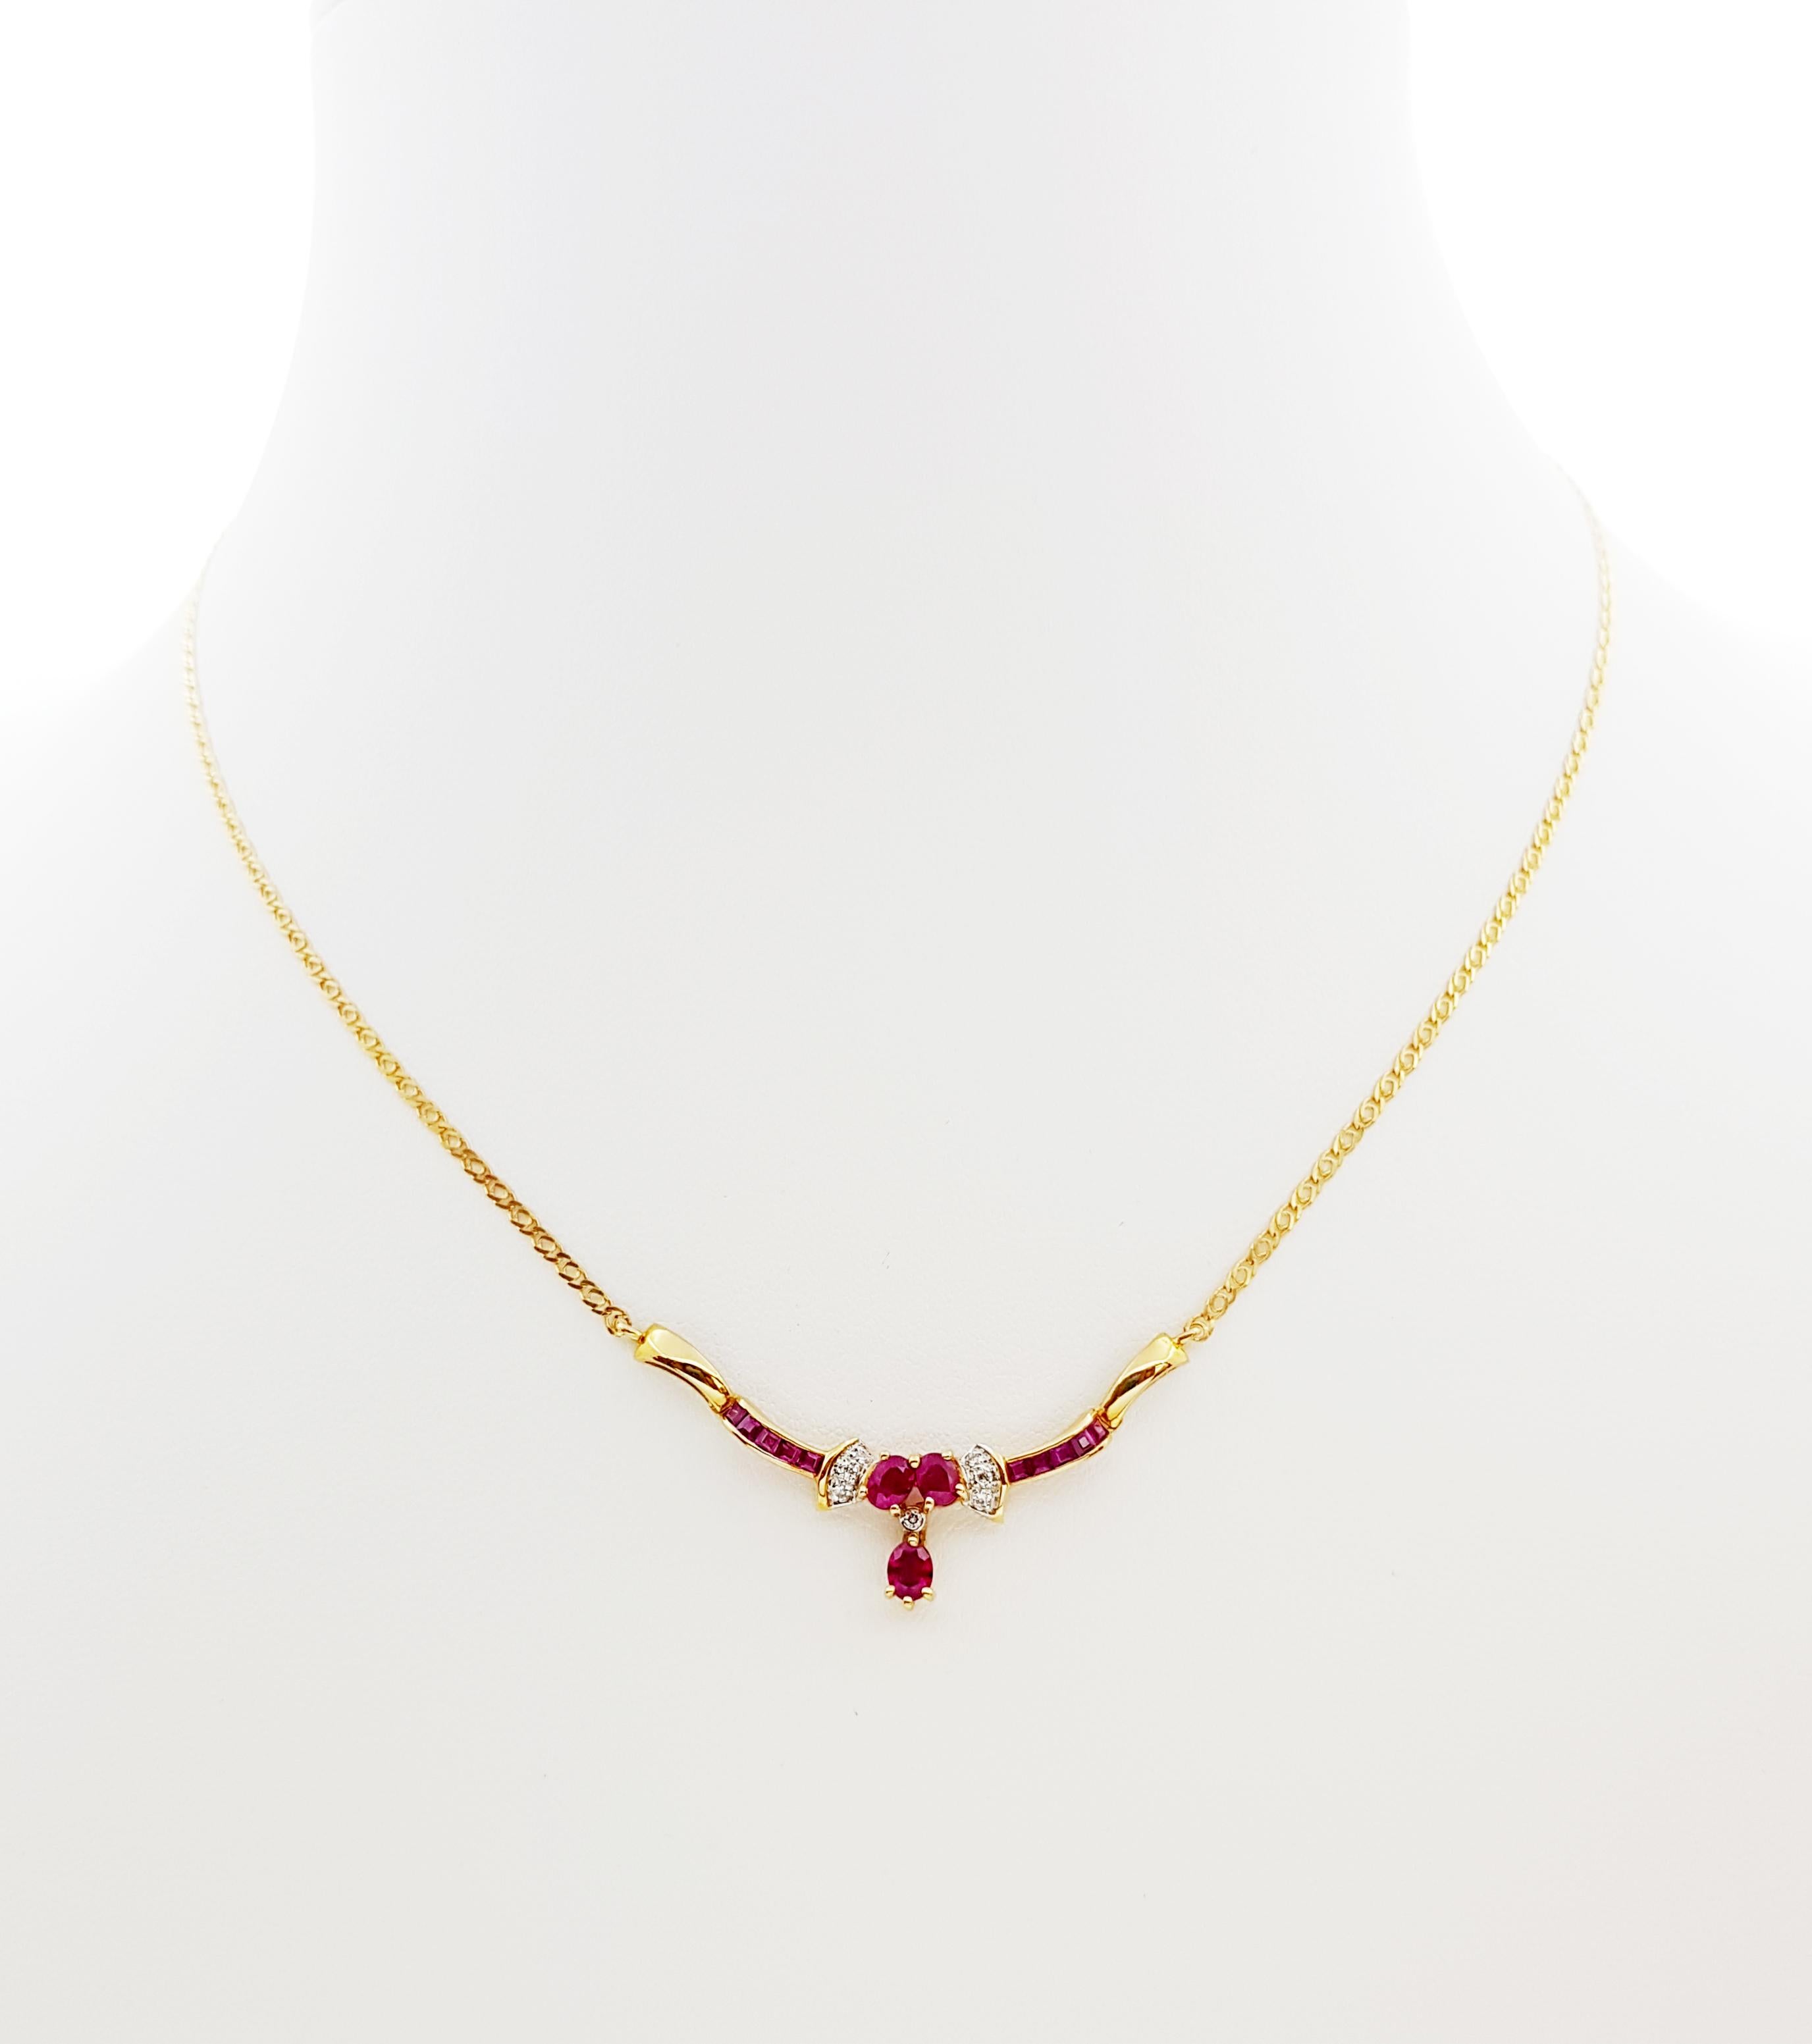 Ruby 1.15 carats with Diamond 0.06 carat Necklace set in 18 Karat Gold Settings

Width: 2.0 cm 
Length: 44.0 cm
Total Weight: 4.83  grams

